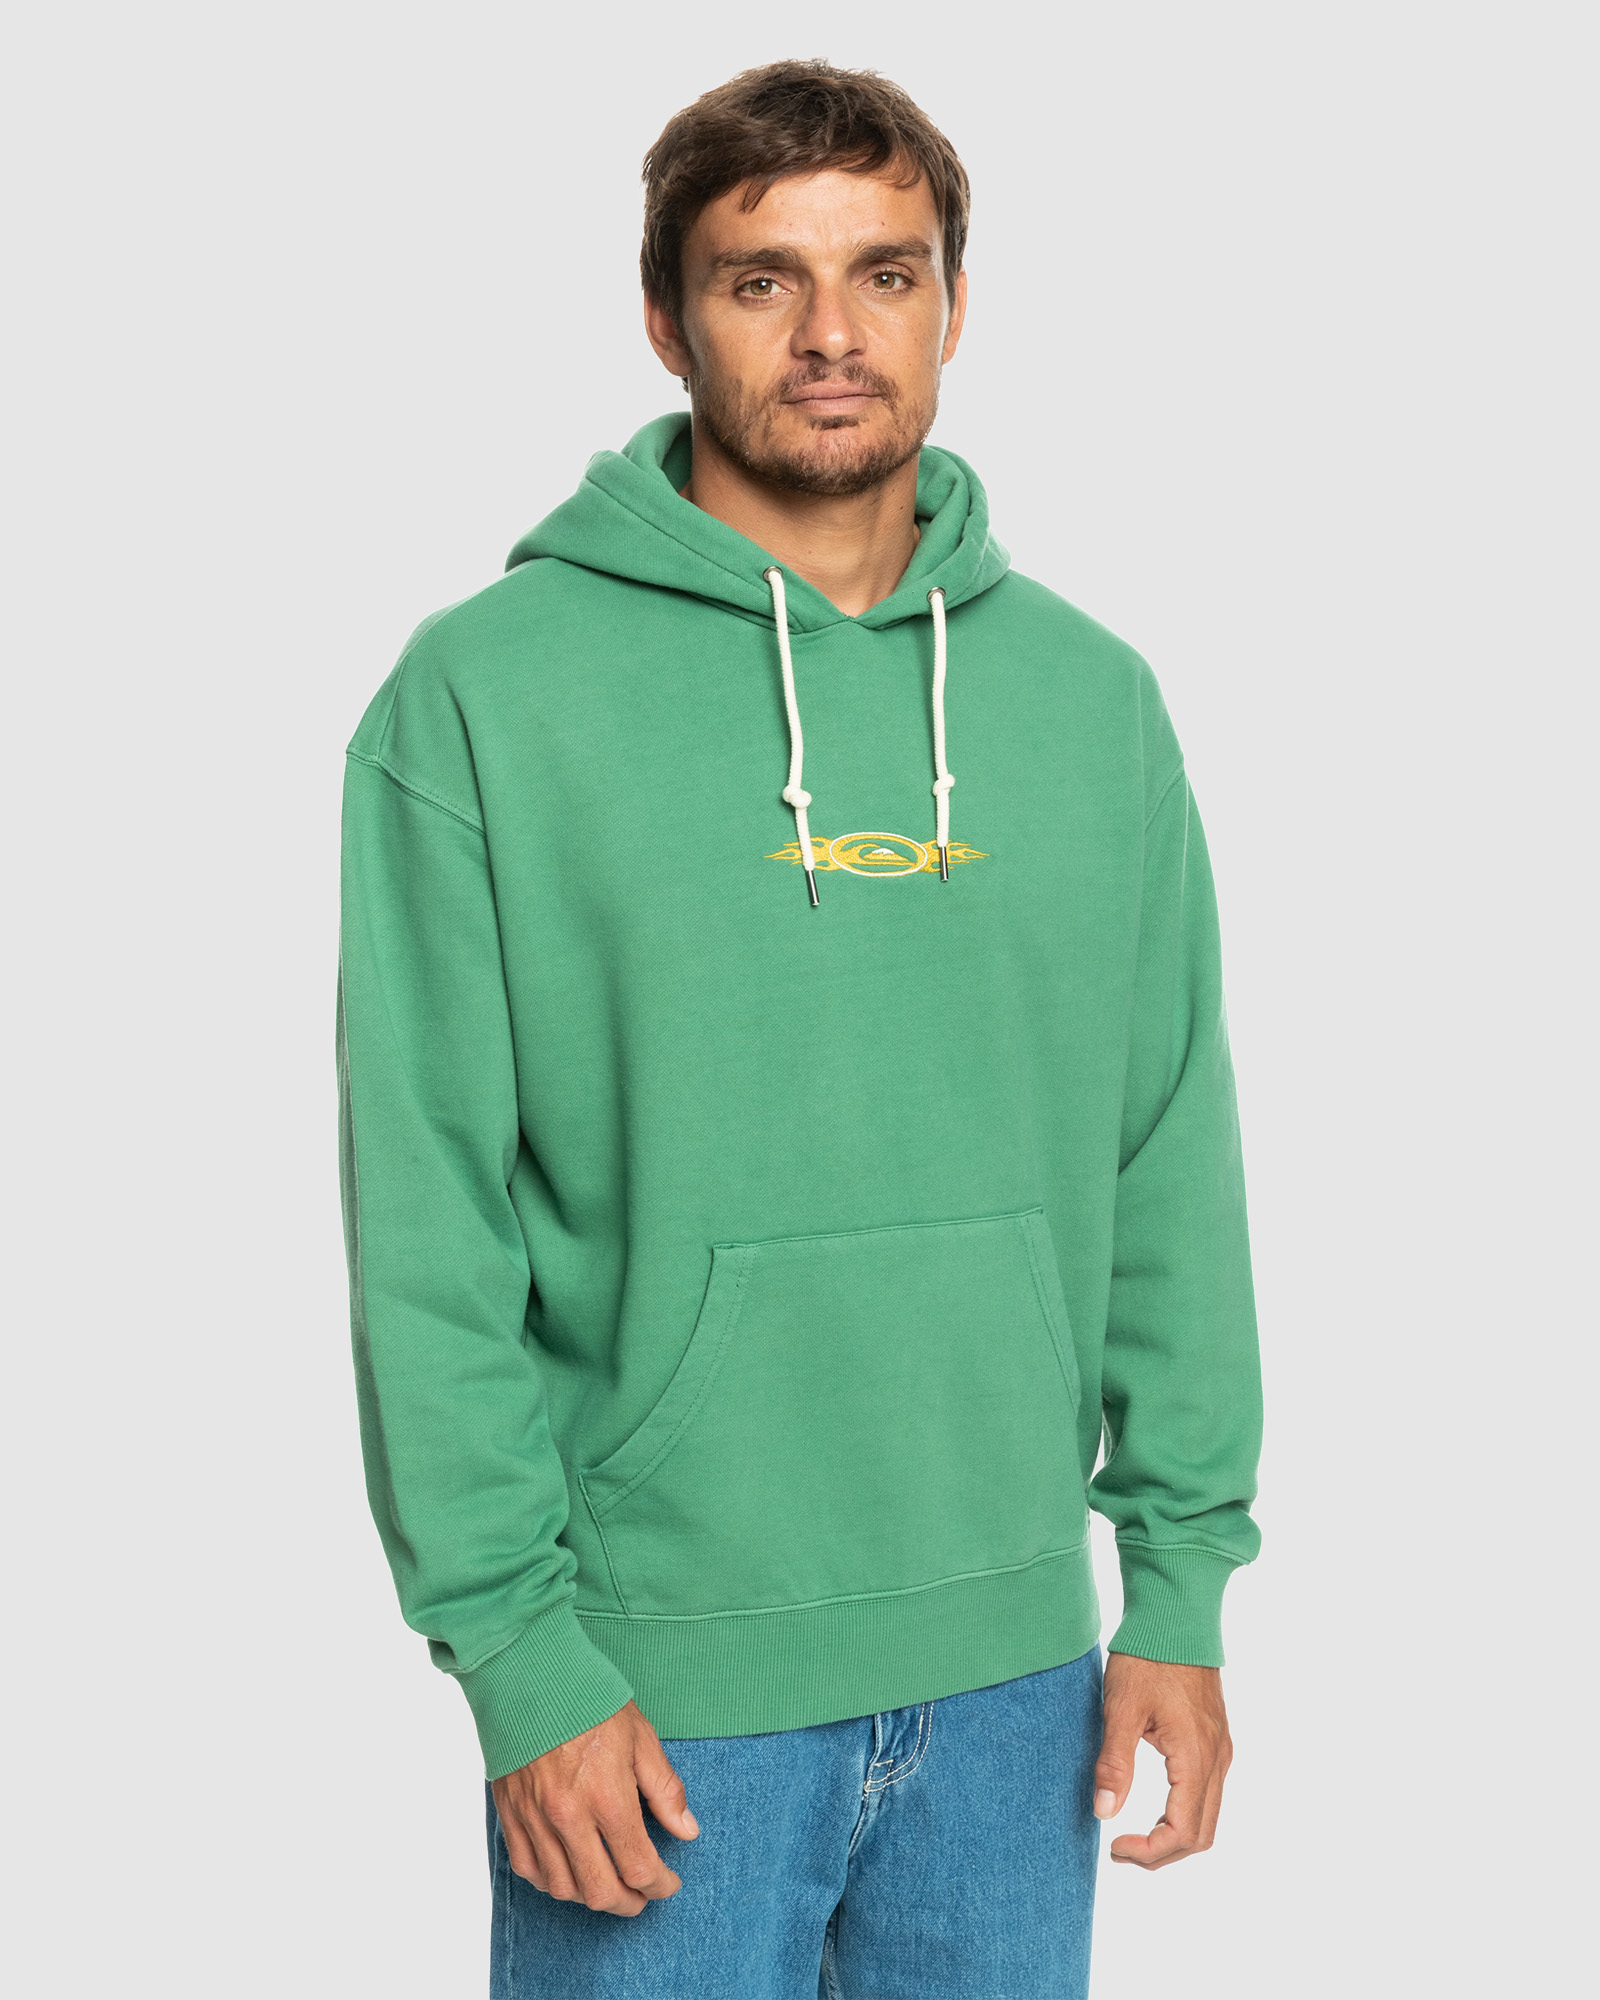 40% OFF - The 4 Elements of Car Guys Car Hoodie